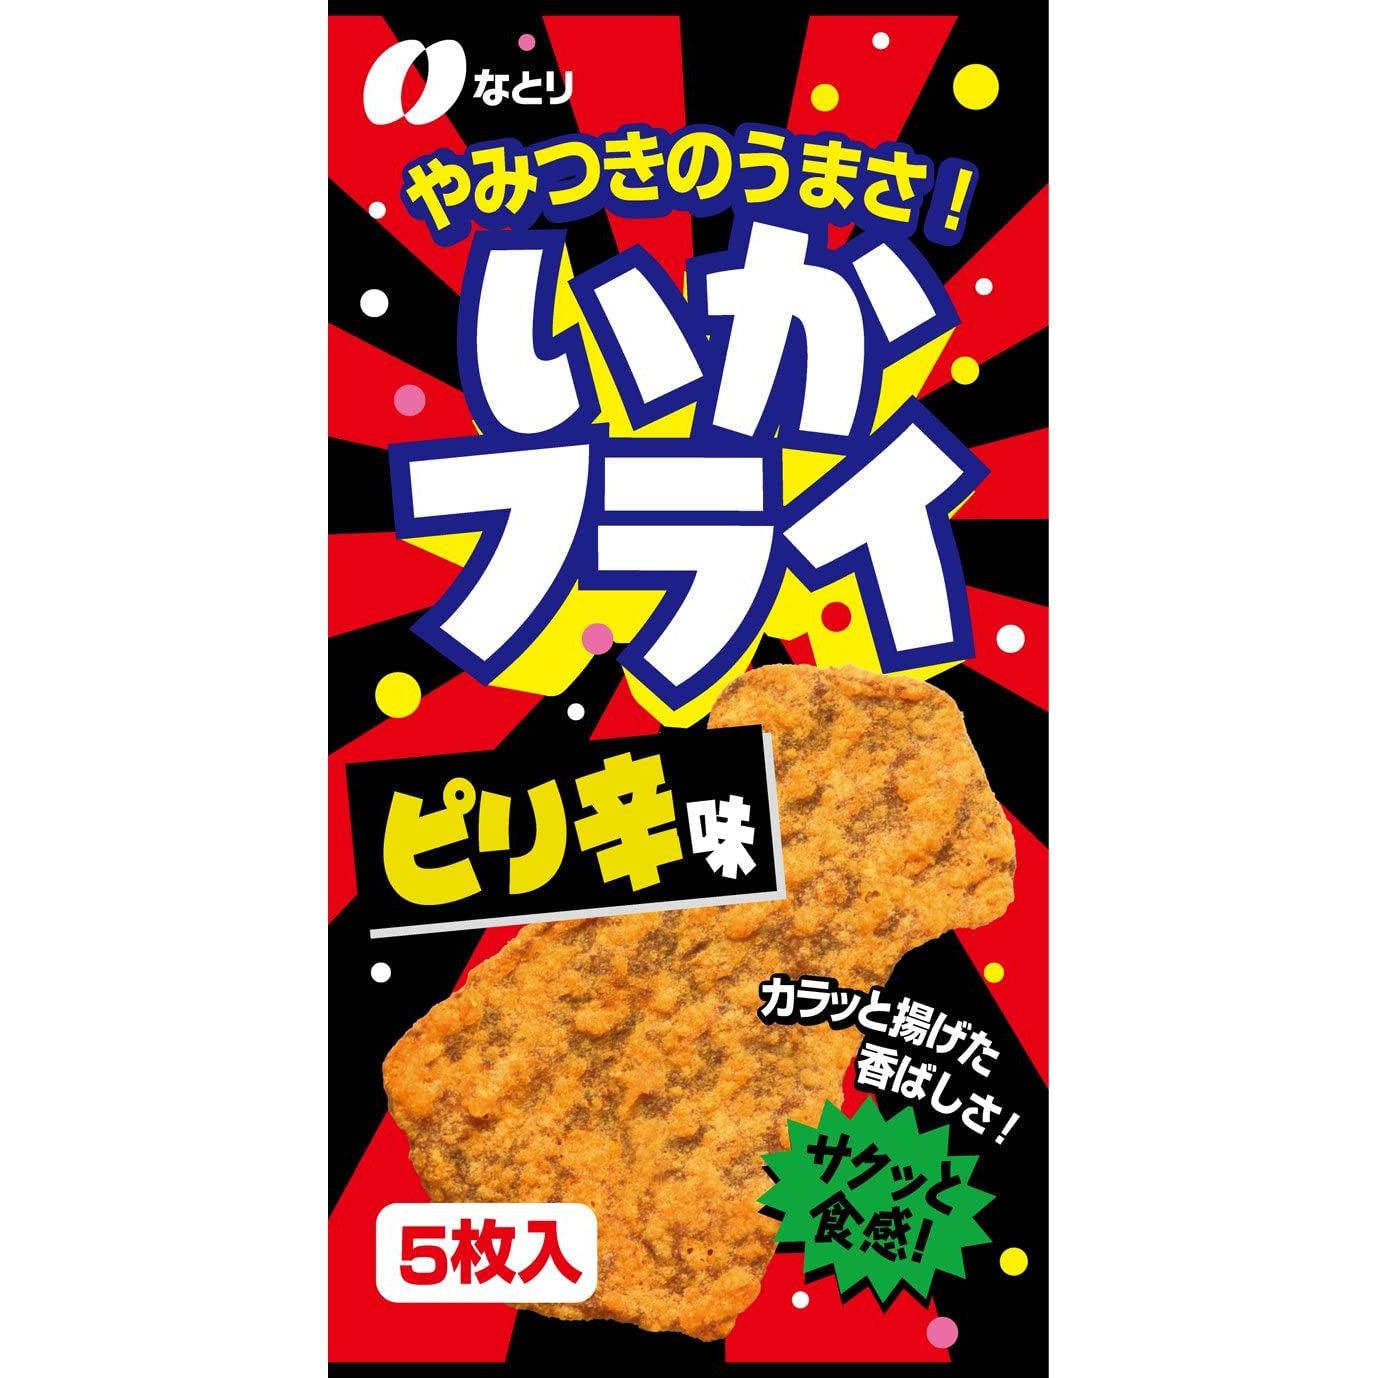 Natori Ika Fry Spicy Batter Fried Squid Snack 5 Pieces